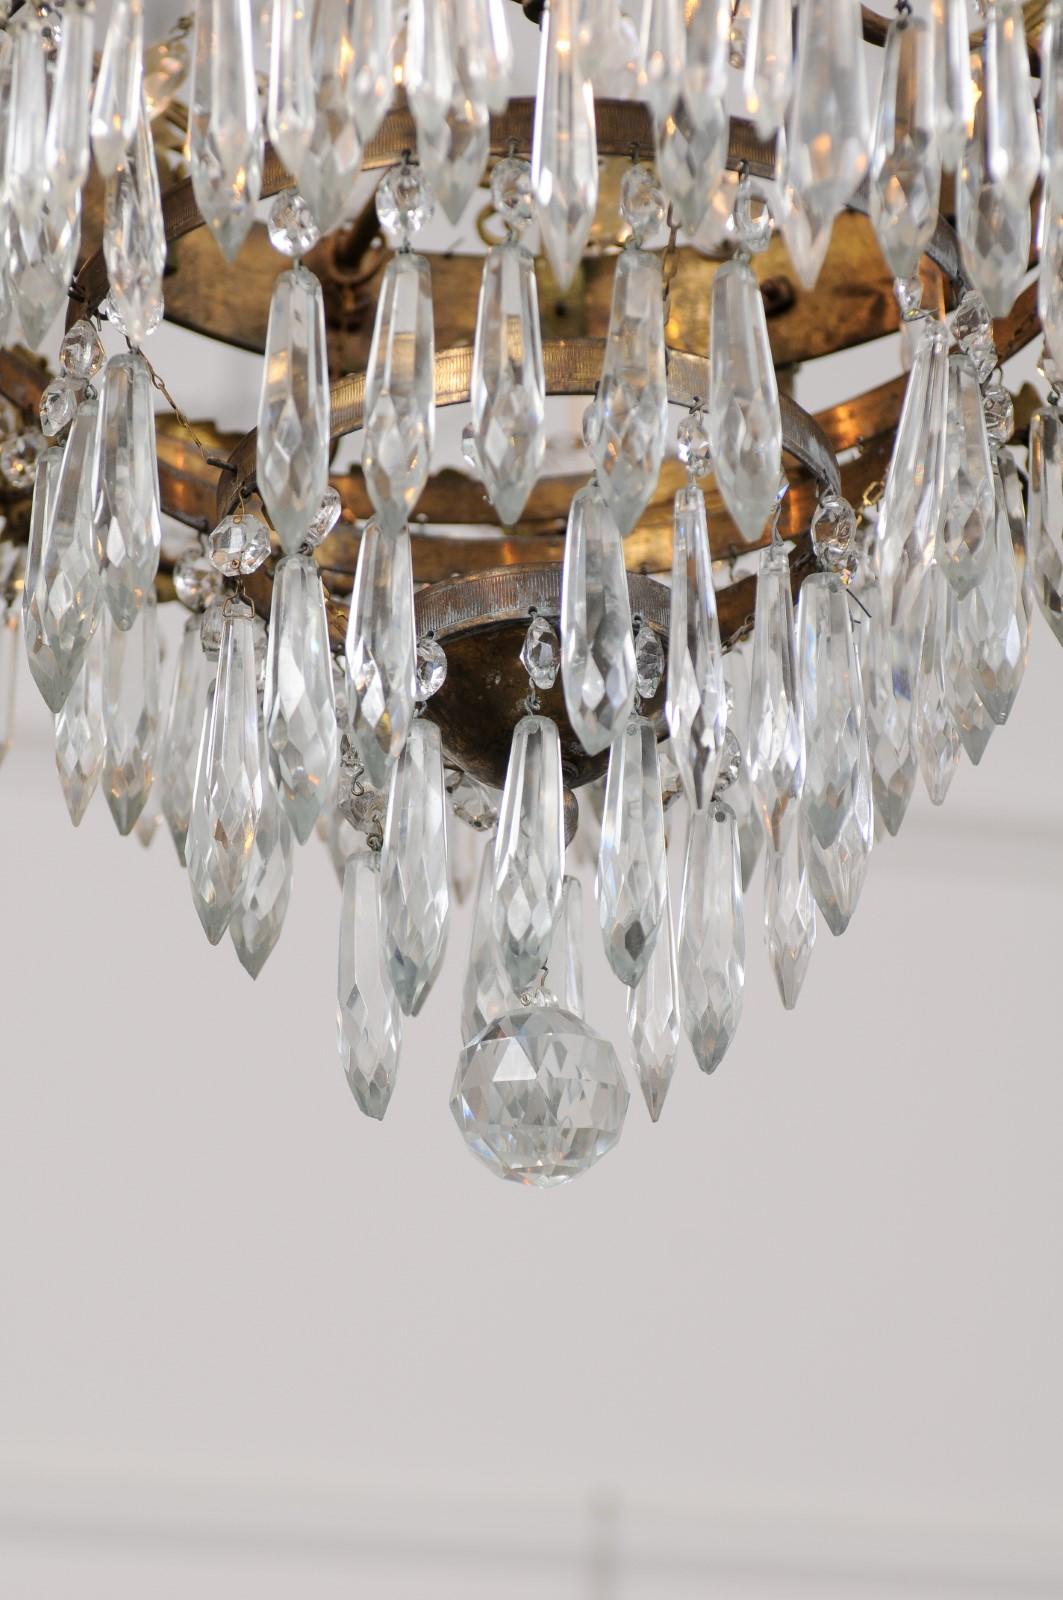 French Empire Cut Crystal and Bronze Eight-Light Chandelier, Early 20th Century (20. Jahrhundert)